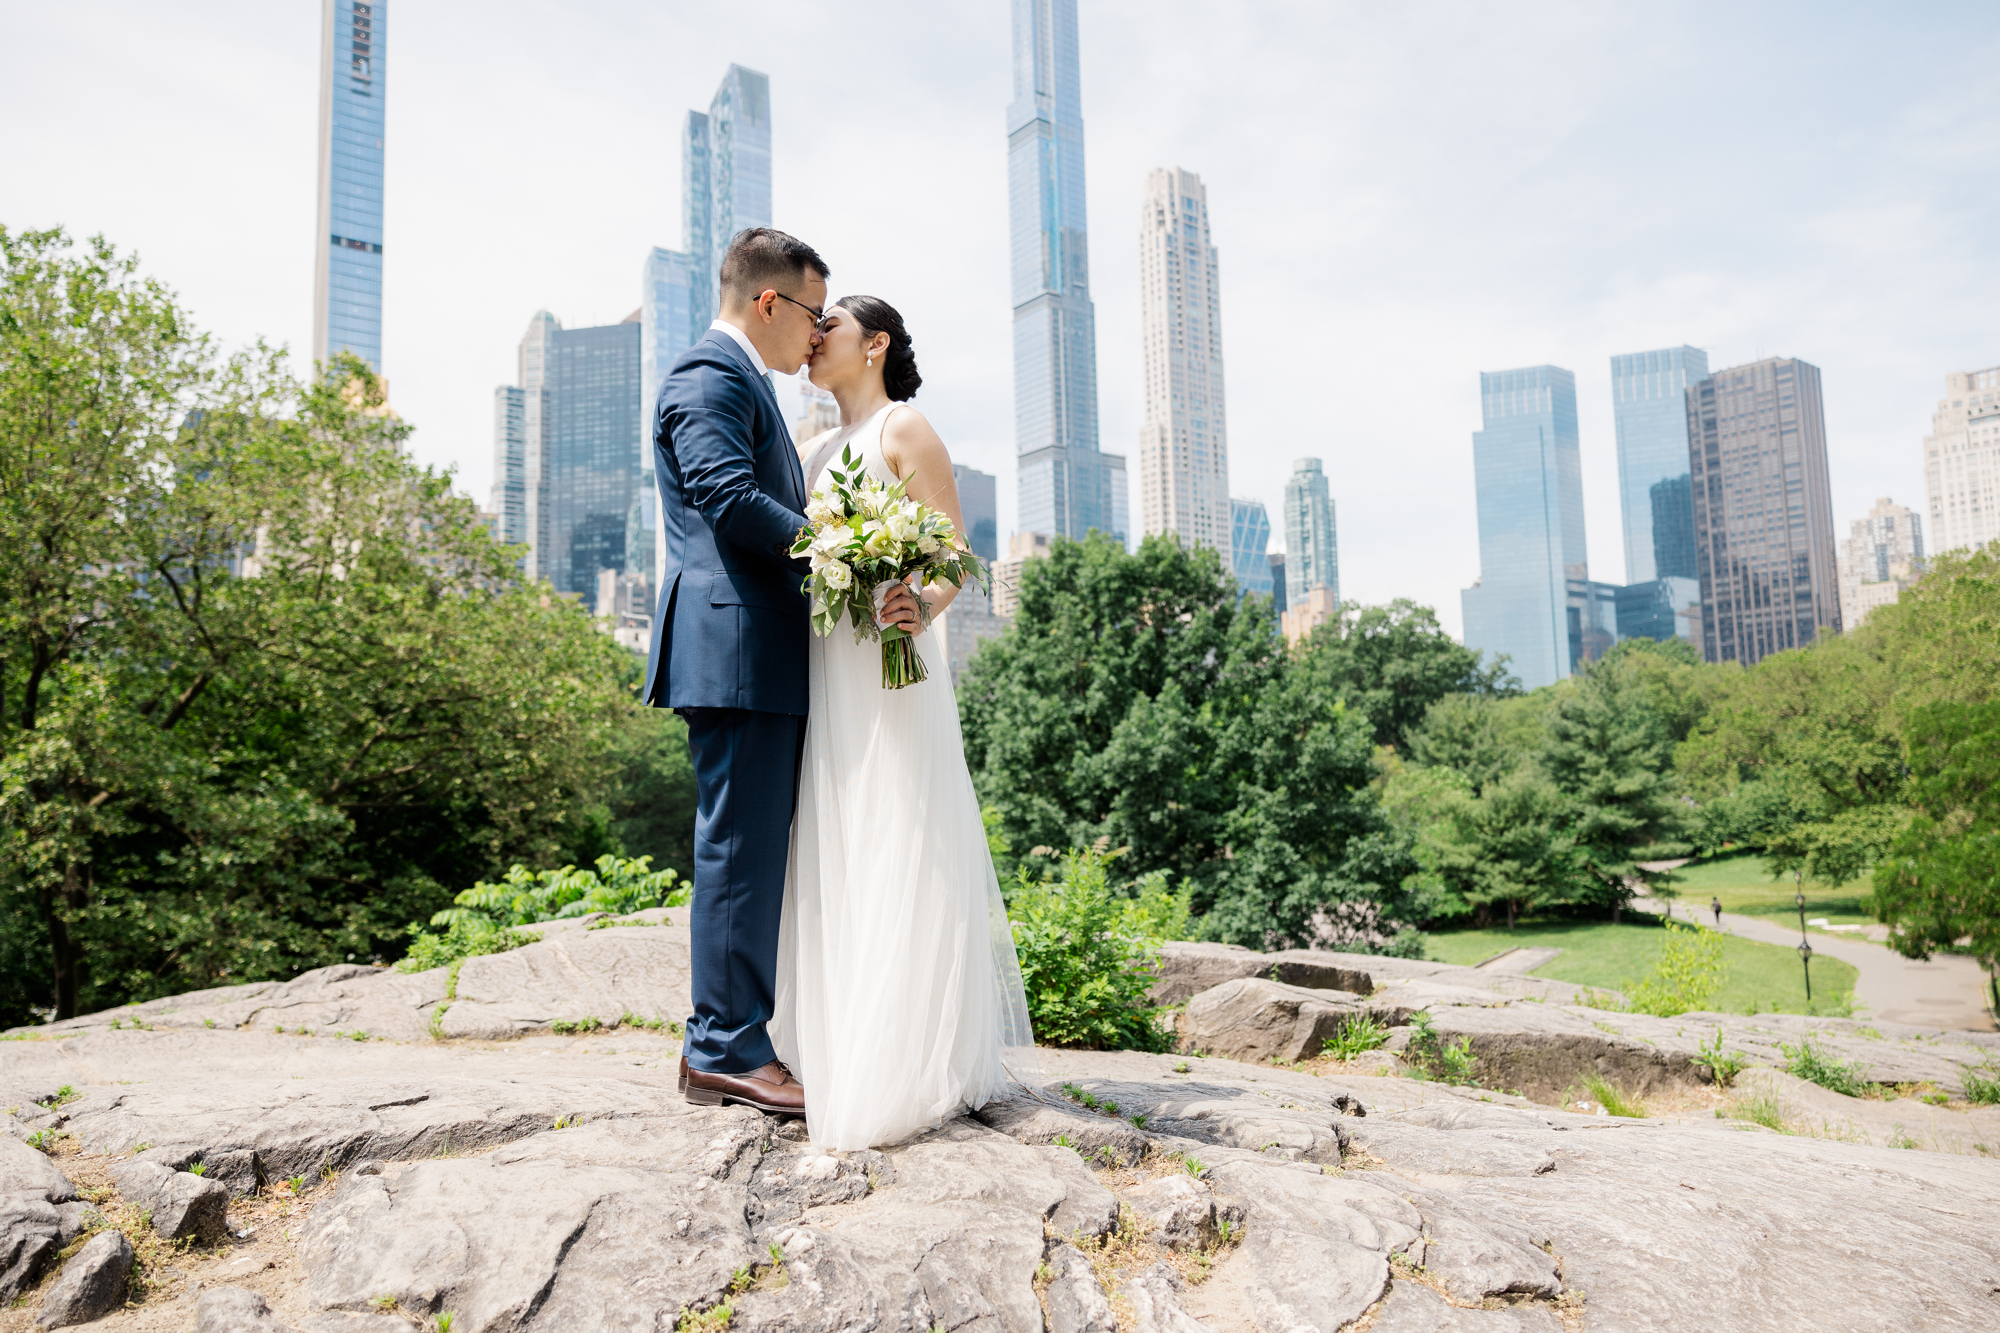 Breathtaking Elopement Photos in DUMBO and Central Park New York